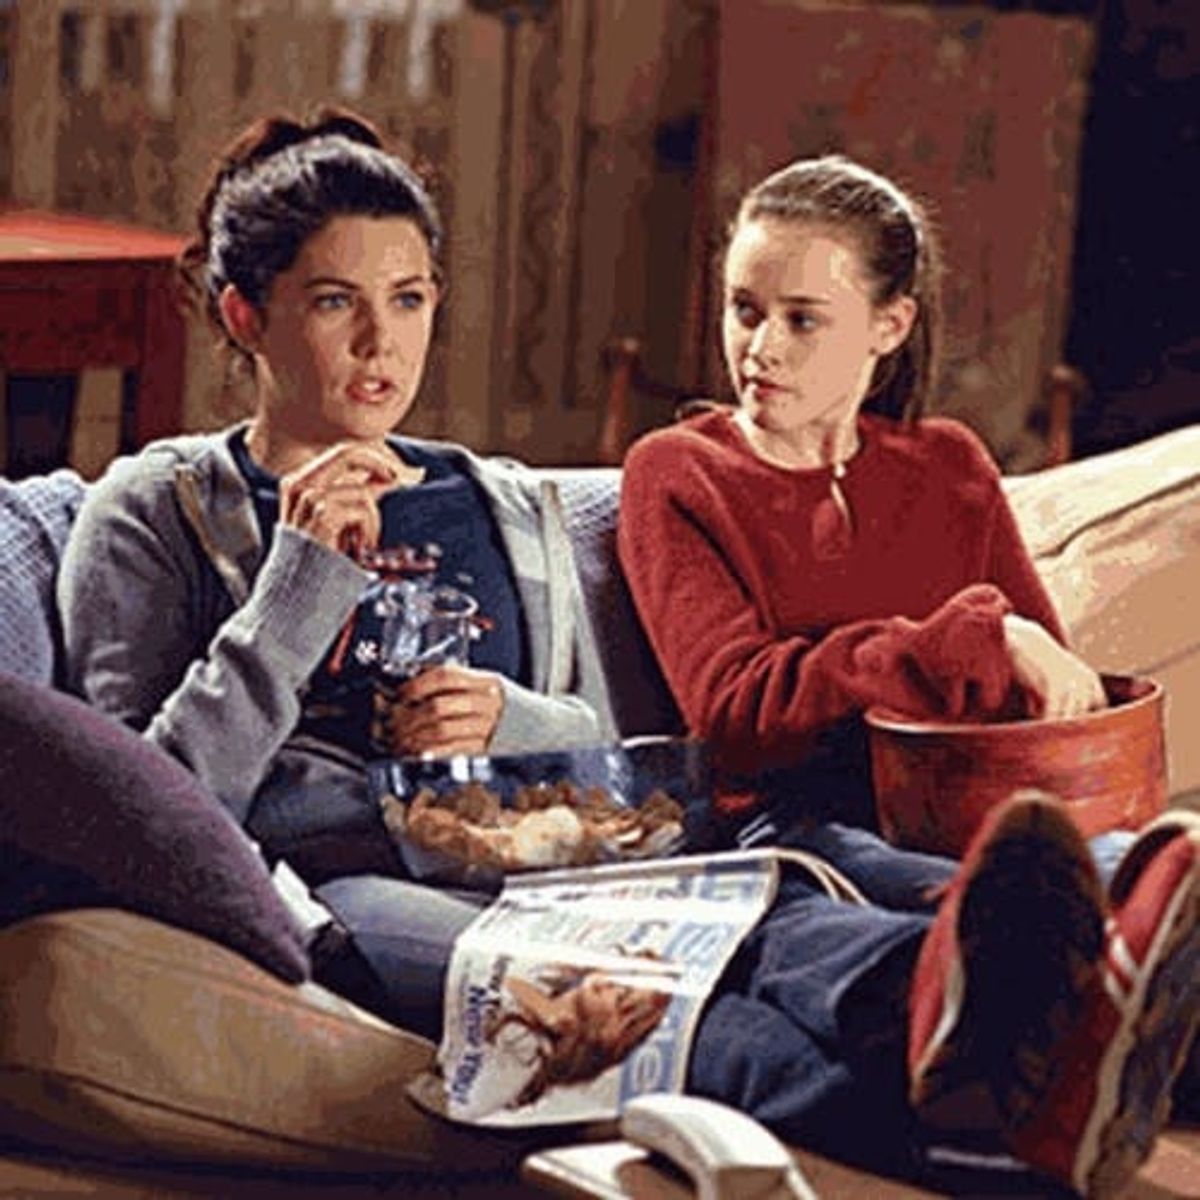 Get the Shabby-Chic Vibe of the Gilmore Girls’ House